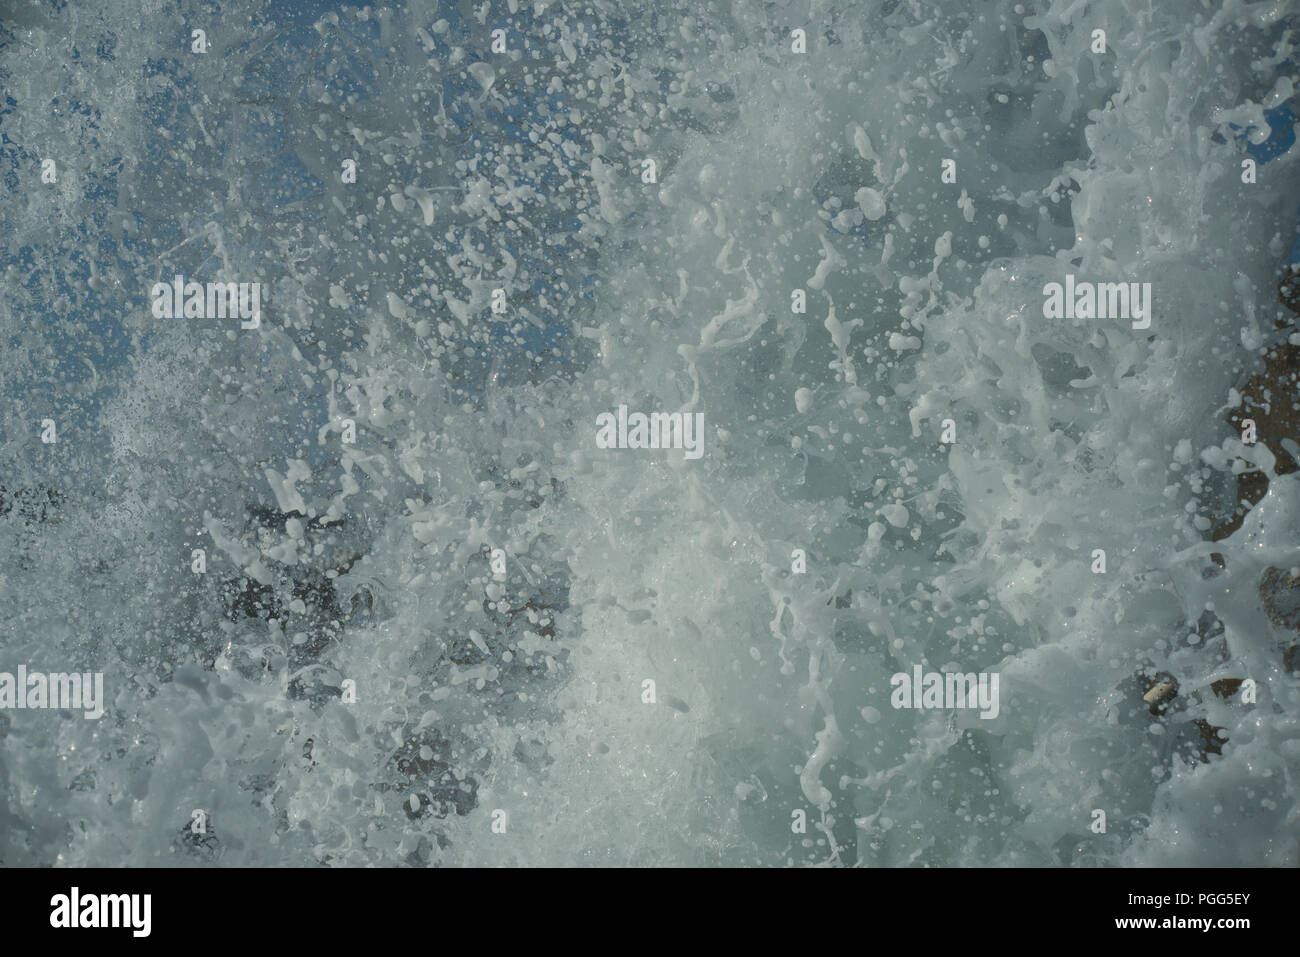 Water droplets suspended in the air as a wave hits a sea wall. Large splash of foaming spray. Stock Photo